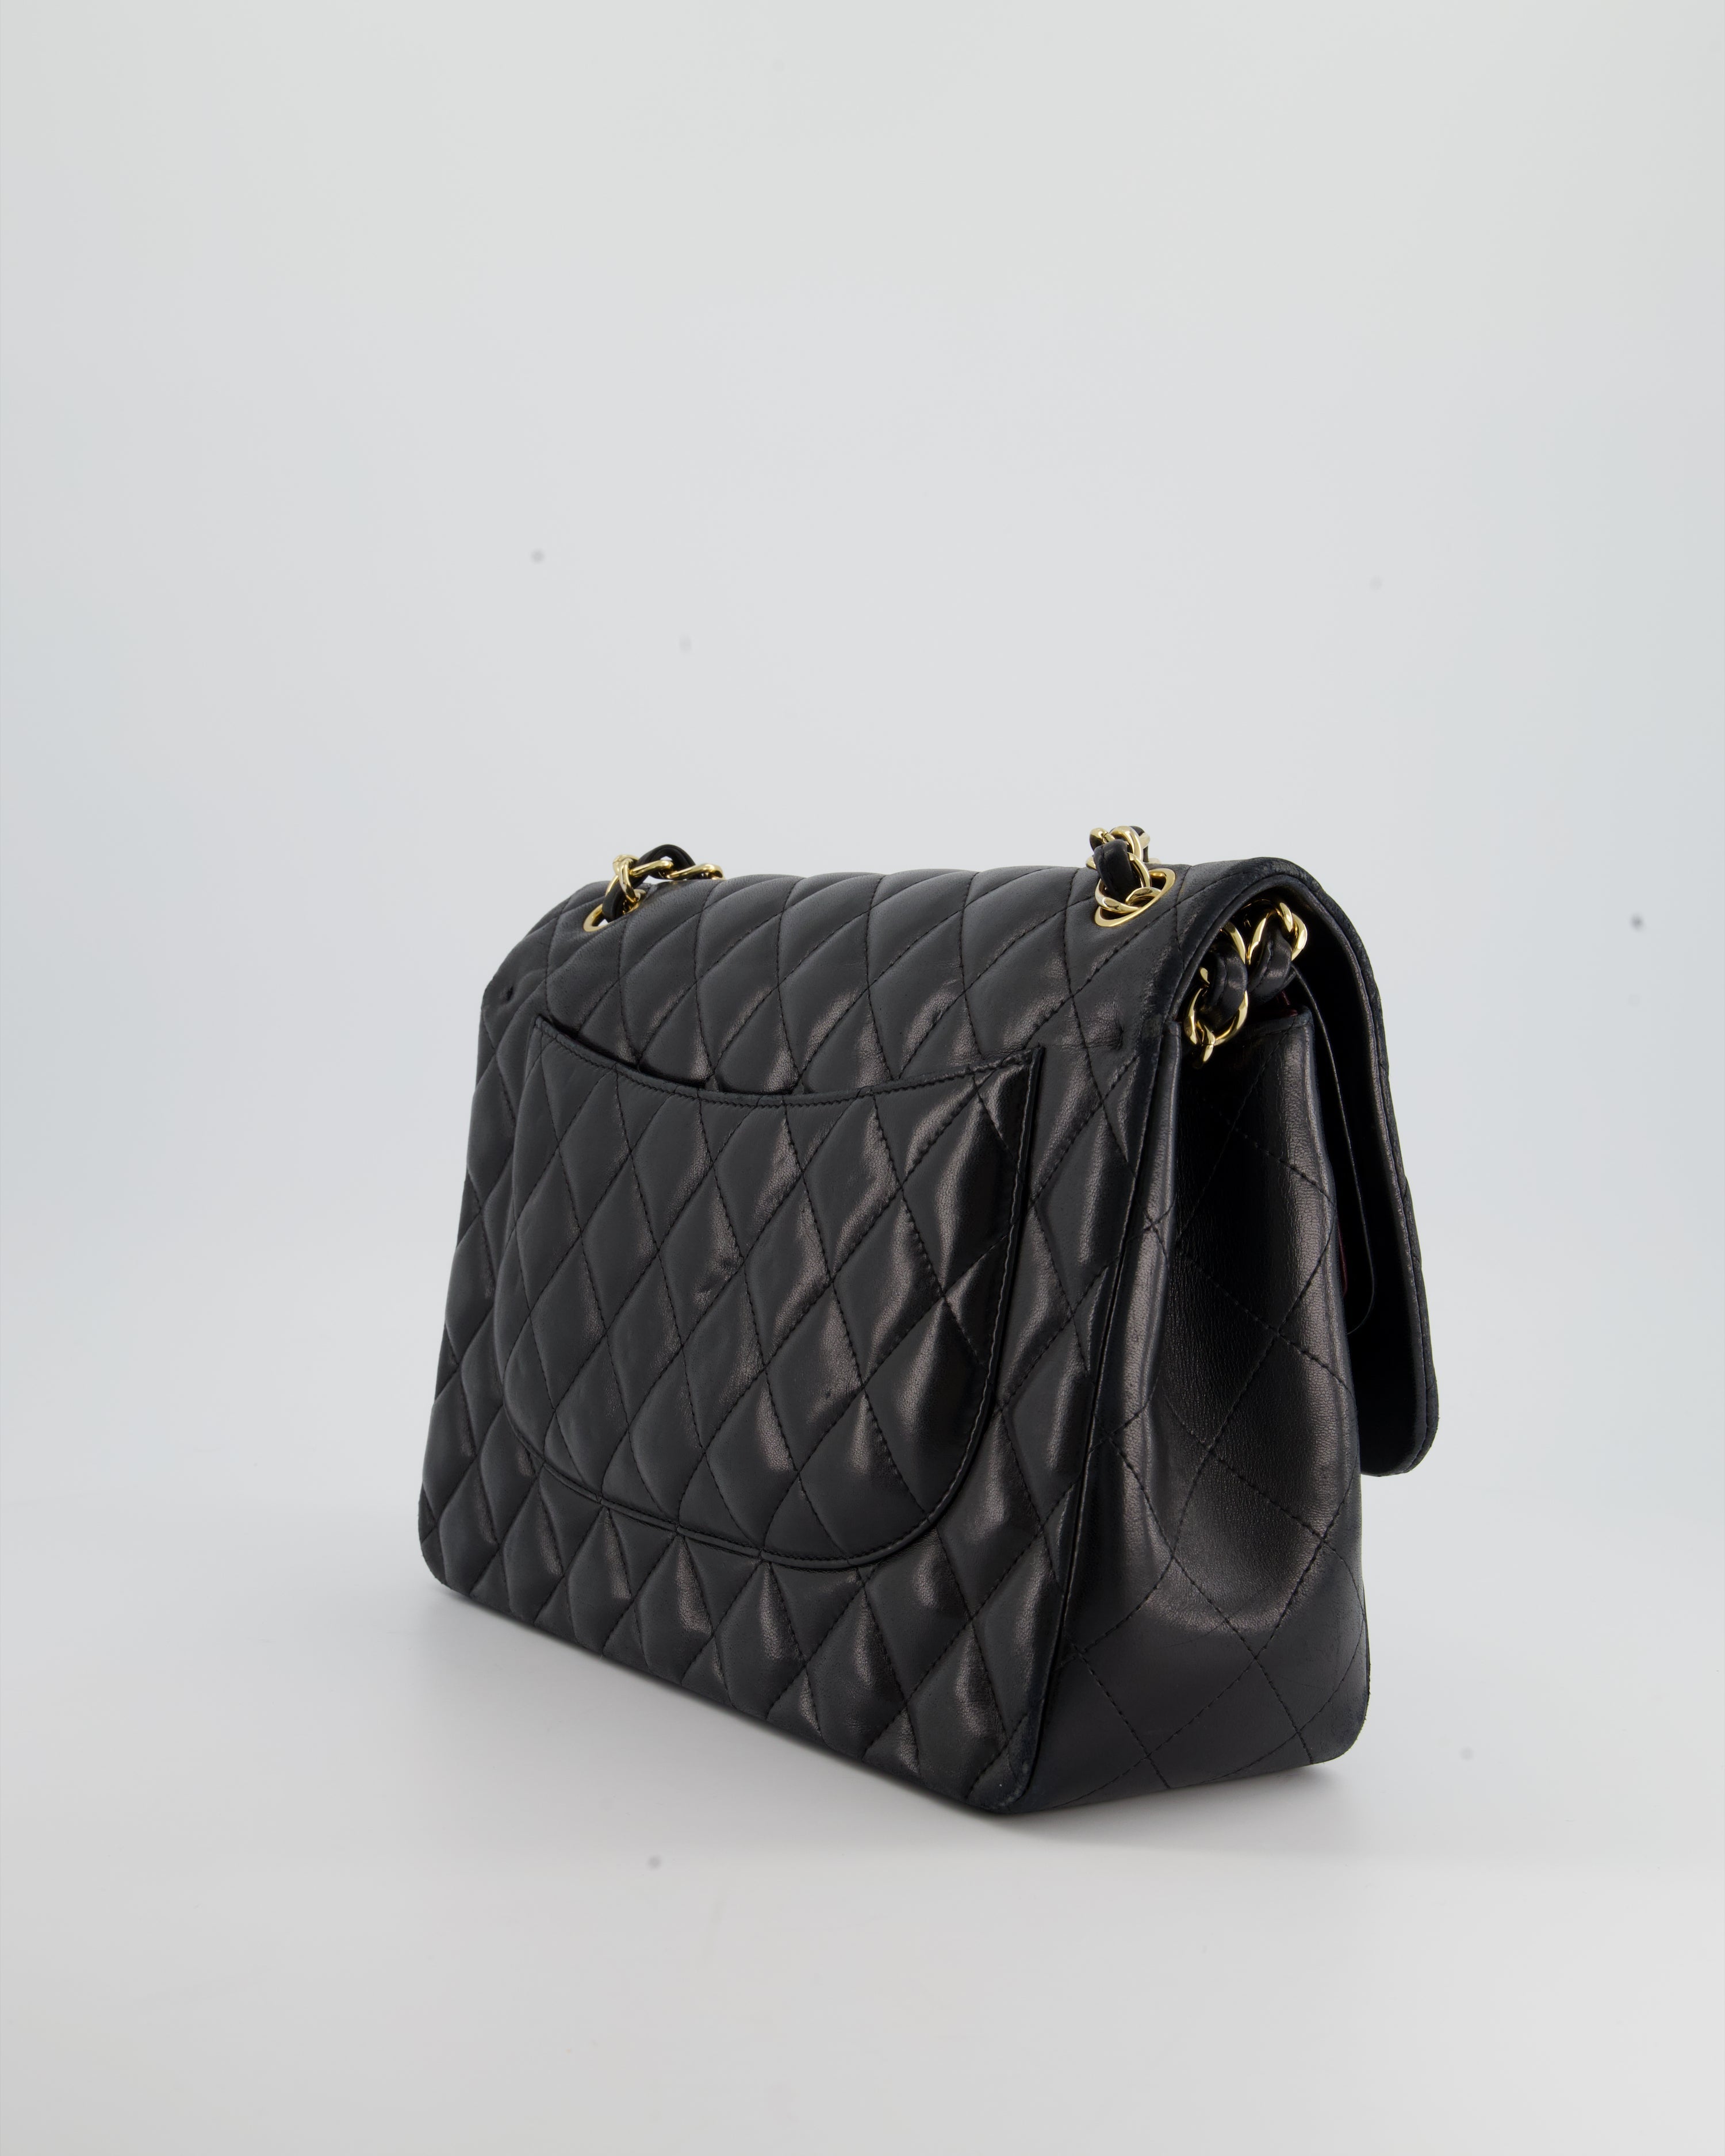 Chanel Black Jumbo Classic Double Flap Bag in Lambskin with Gold Hardware RRP £9,240